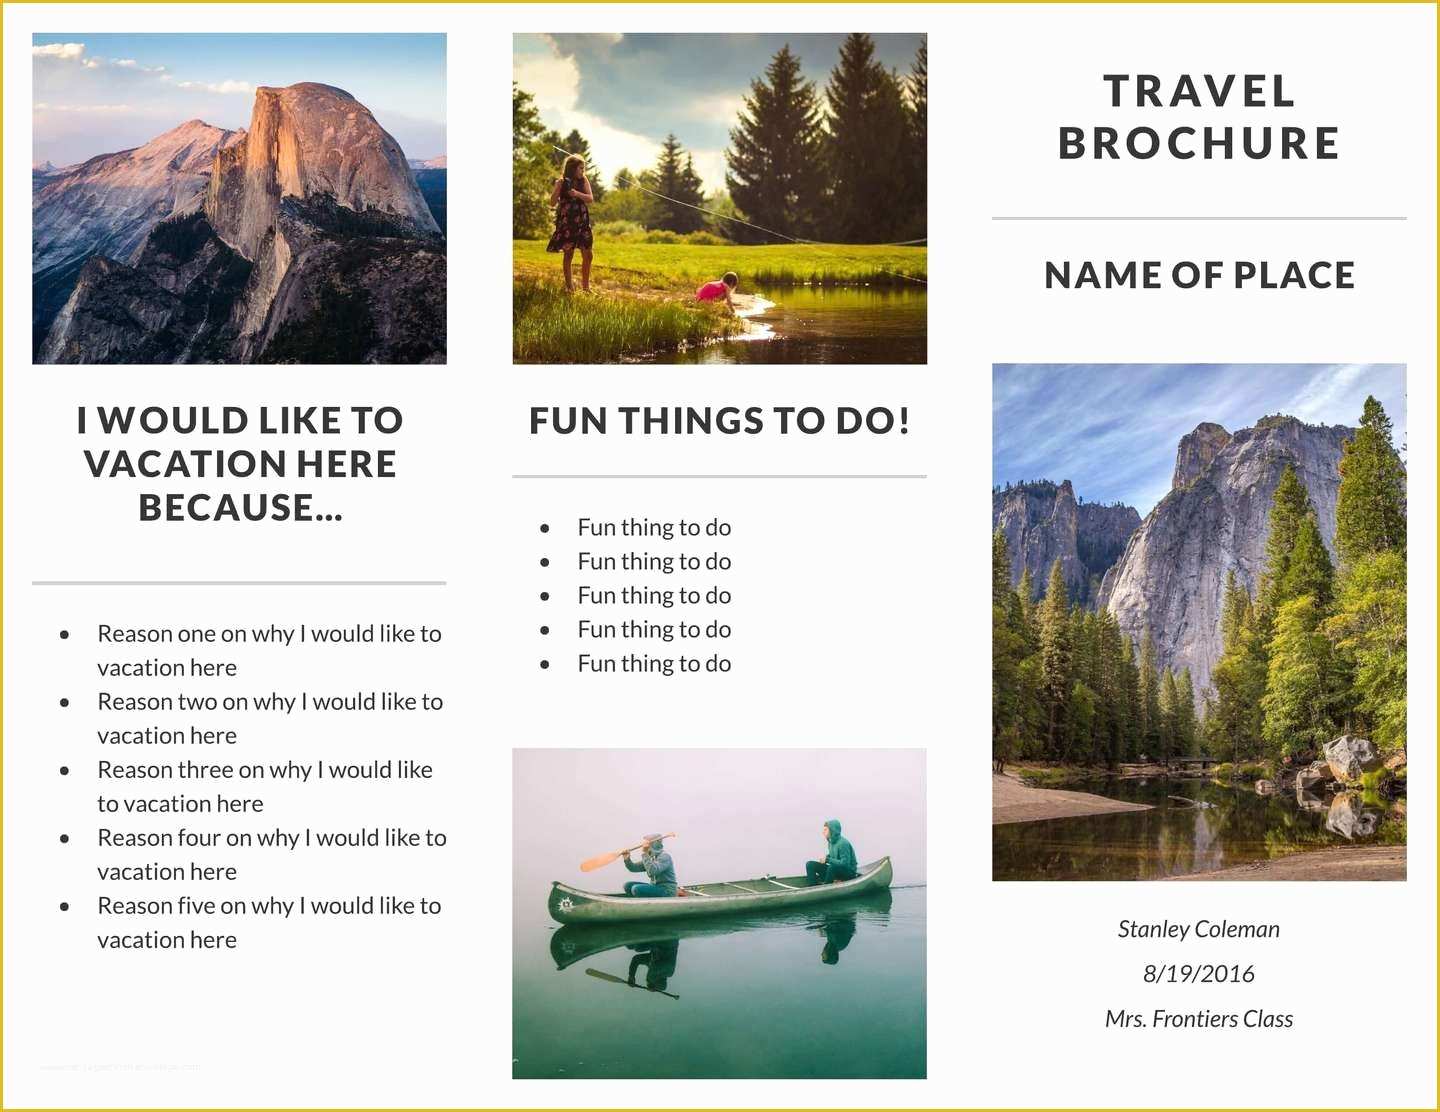 Free Brochure Templates for Students Of Travel Brochure Examples for Students